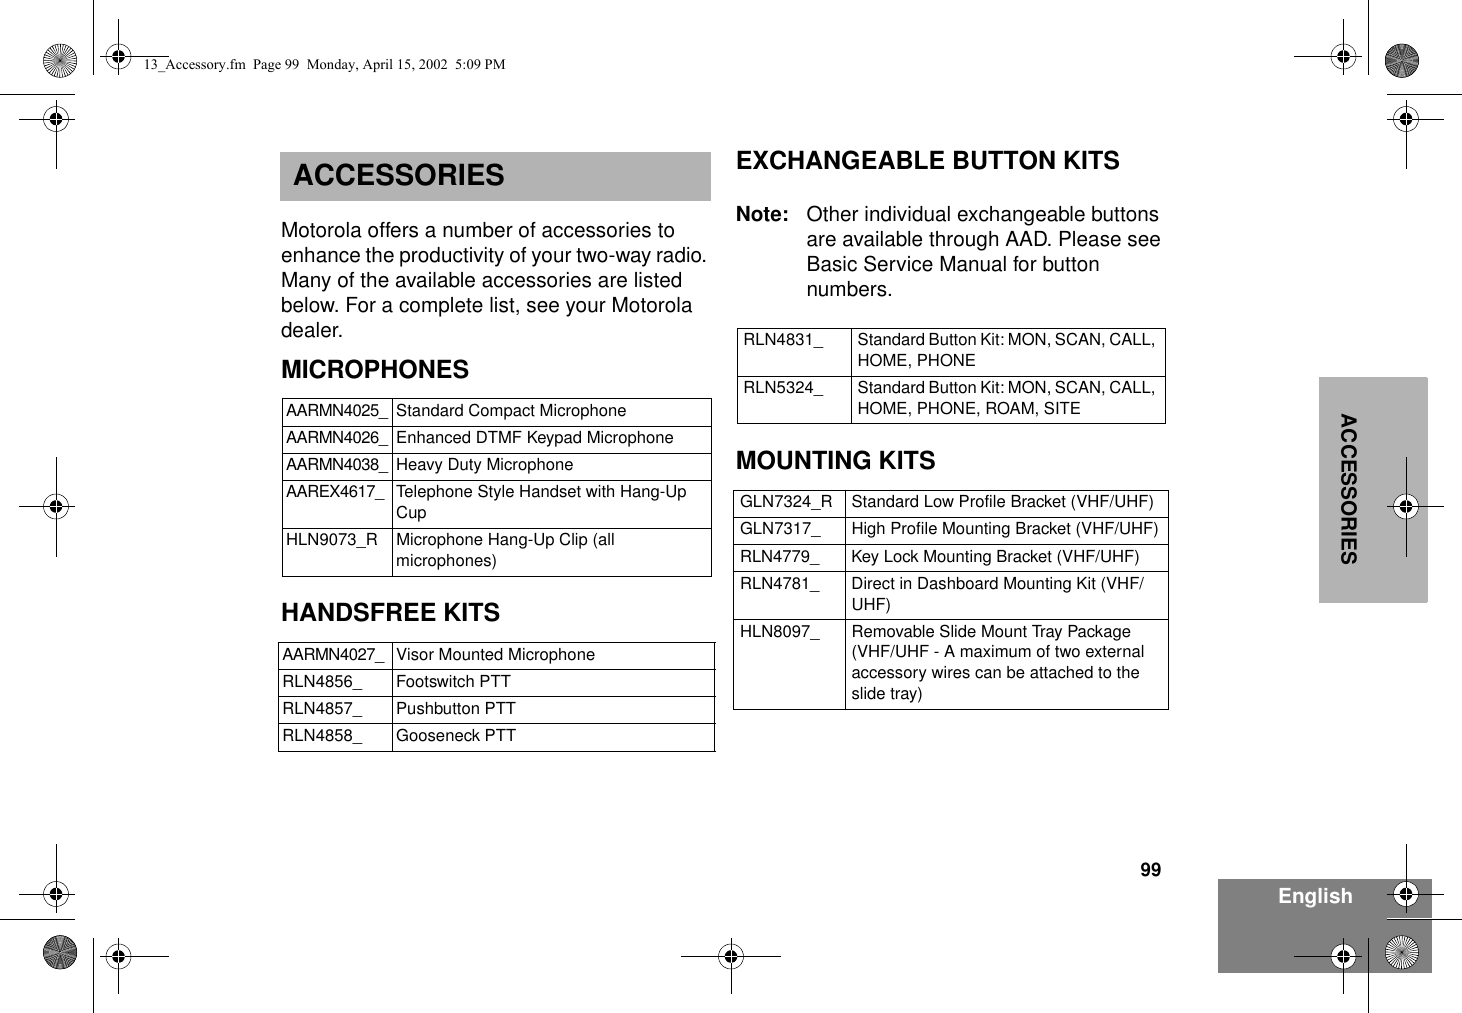 99EnglishACCESSORIESACCESSORIESMotorola offers a number of accessories to enhance the productivity of your two-way radio. Many of the available accessories are listed below. For a complete list, see your Motorola dealer.MICROPHONESHANDSFREE KITSEXCHANGEABLE BUTTON KITSNote: Other individual exchangeable buttons are available through AAD. Please see Basic Service Manual for button numbers.MOUNTING KITSAARMN4025_ Standard Compact MicrophoneAARMN4026_ Enhanced DTMF Keypad MicrophoneAARMN4038_ Heavy Duty MicrophoneAAREX4617_ Telephone Style Handset with Hang-Up CupHLN9073_R Microphone Hang-Up Clip (all microphones)AARMN4027_ Visor Mounted MicrophoneRLN4856_ Footswitch PTTRLN4857_ Pushbutton PTTRLN4858_ Gooseneck PTTRLN4831_ Standard Button Kit: MON, SCAN, CALL, HOME, PHONERLN5324_ Standard Button Kit: MON, SCAN, CALL, HOME, PHONE, ROAM, SITEGLN7324_R Standard Low Profile Bracket (VHF/UHF)GLN7317_ High Profile Mounting Bracket (VHF/UHF)RLN4779_ Key Lock Mounting Bracket (VHF/UHF)RLN4781_ Direct in Dashboard Mounting Kit (VHF/UHF)HLN8097_ Removable Slide Mount Tray Package (VHF/UHF - A maximum of two external accessory wires can be attached to the slide tray)13_Accessory.fm  Page 99  Monday, April 15, 2002  5:09 PM